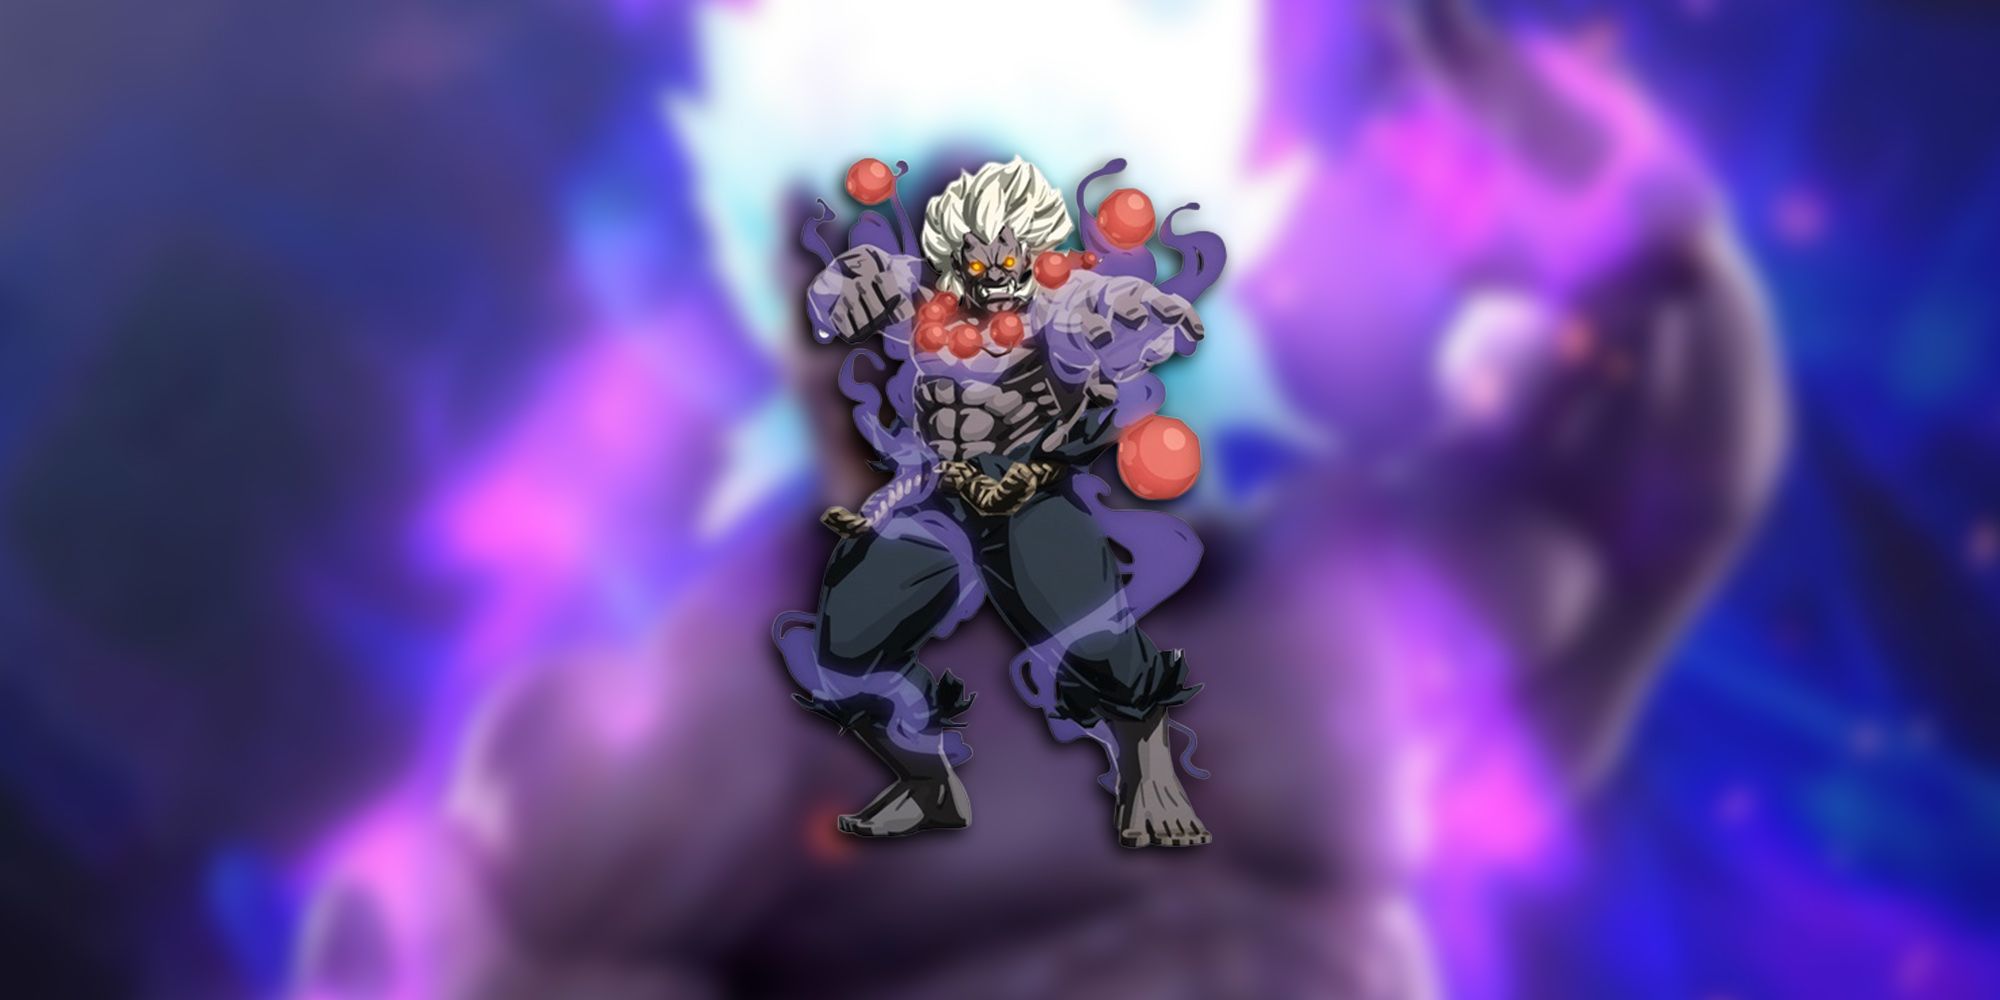 PNG Of Oni From Street Fighter Overlaid On Image Of Him In-Game